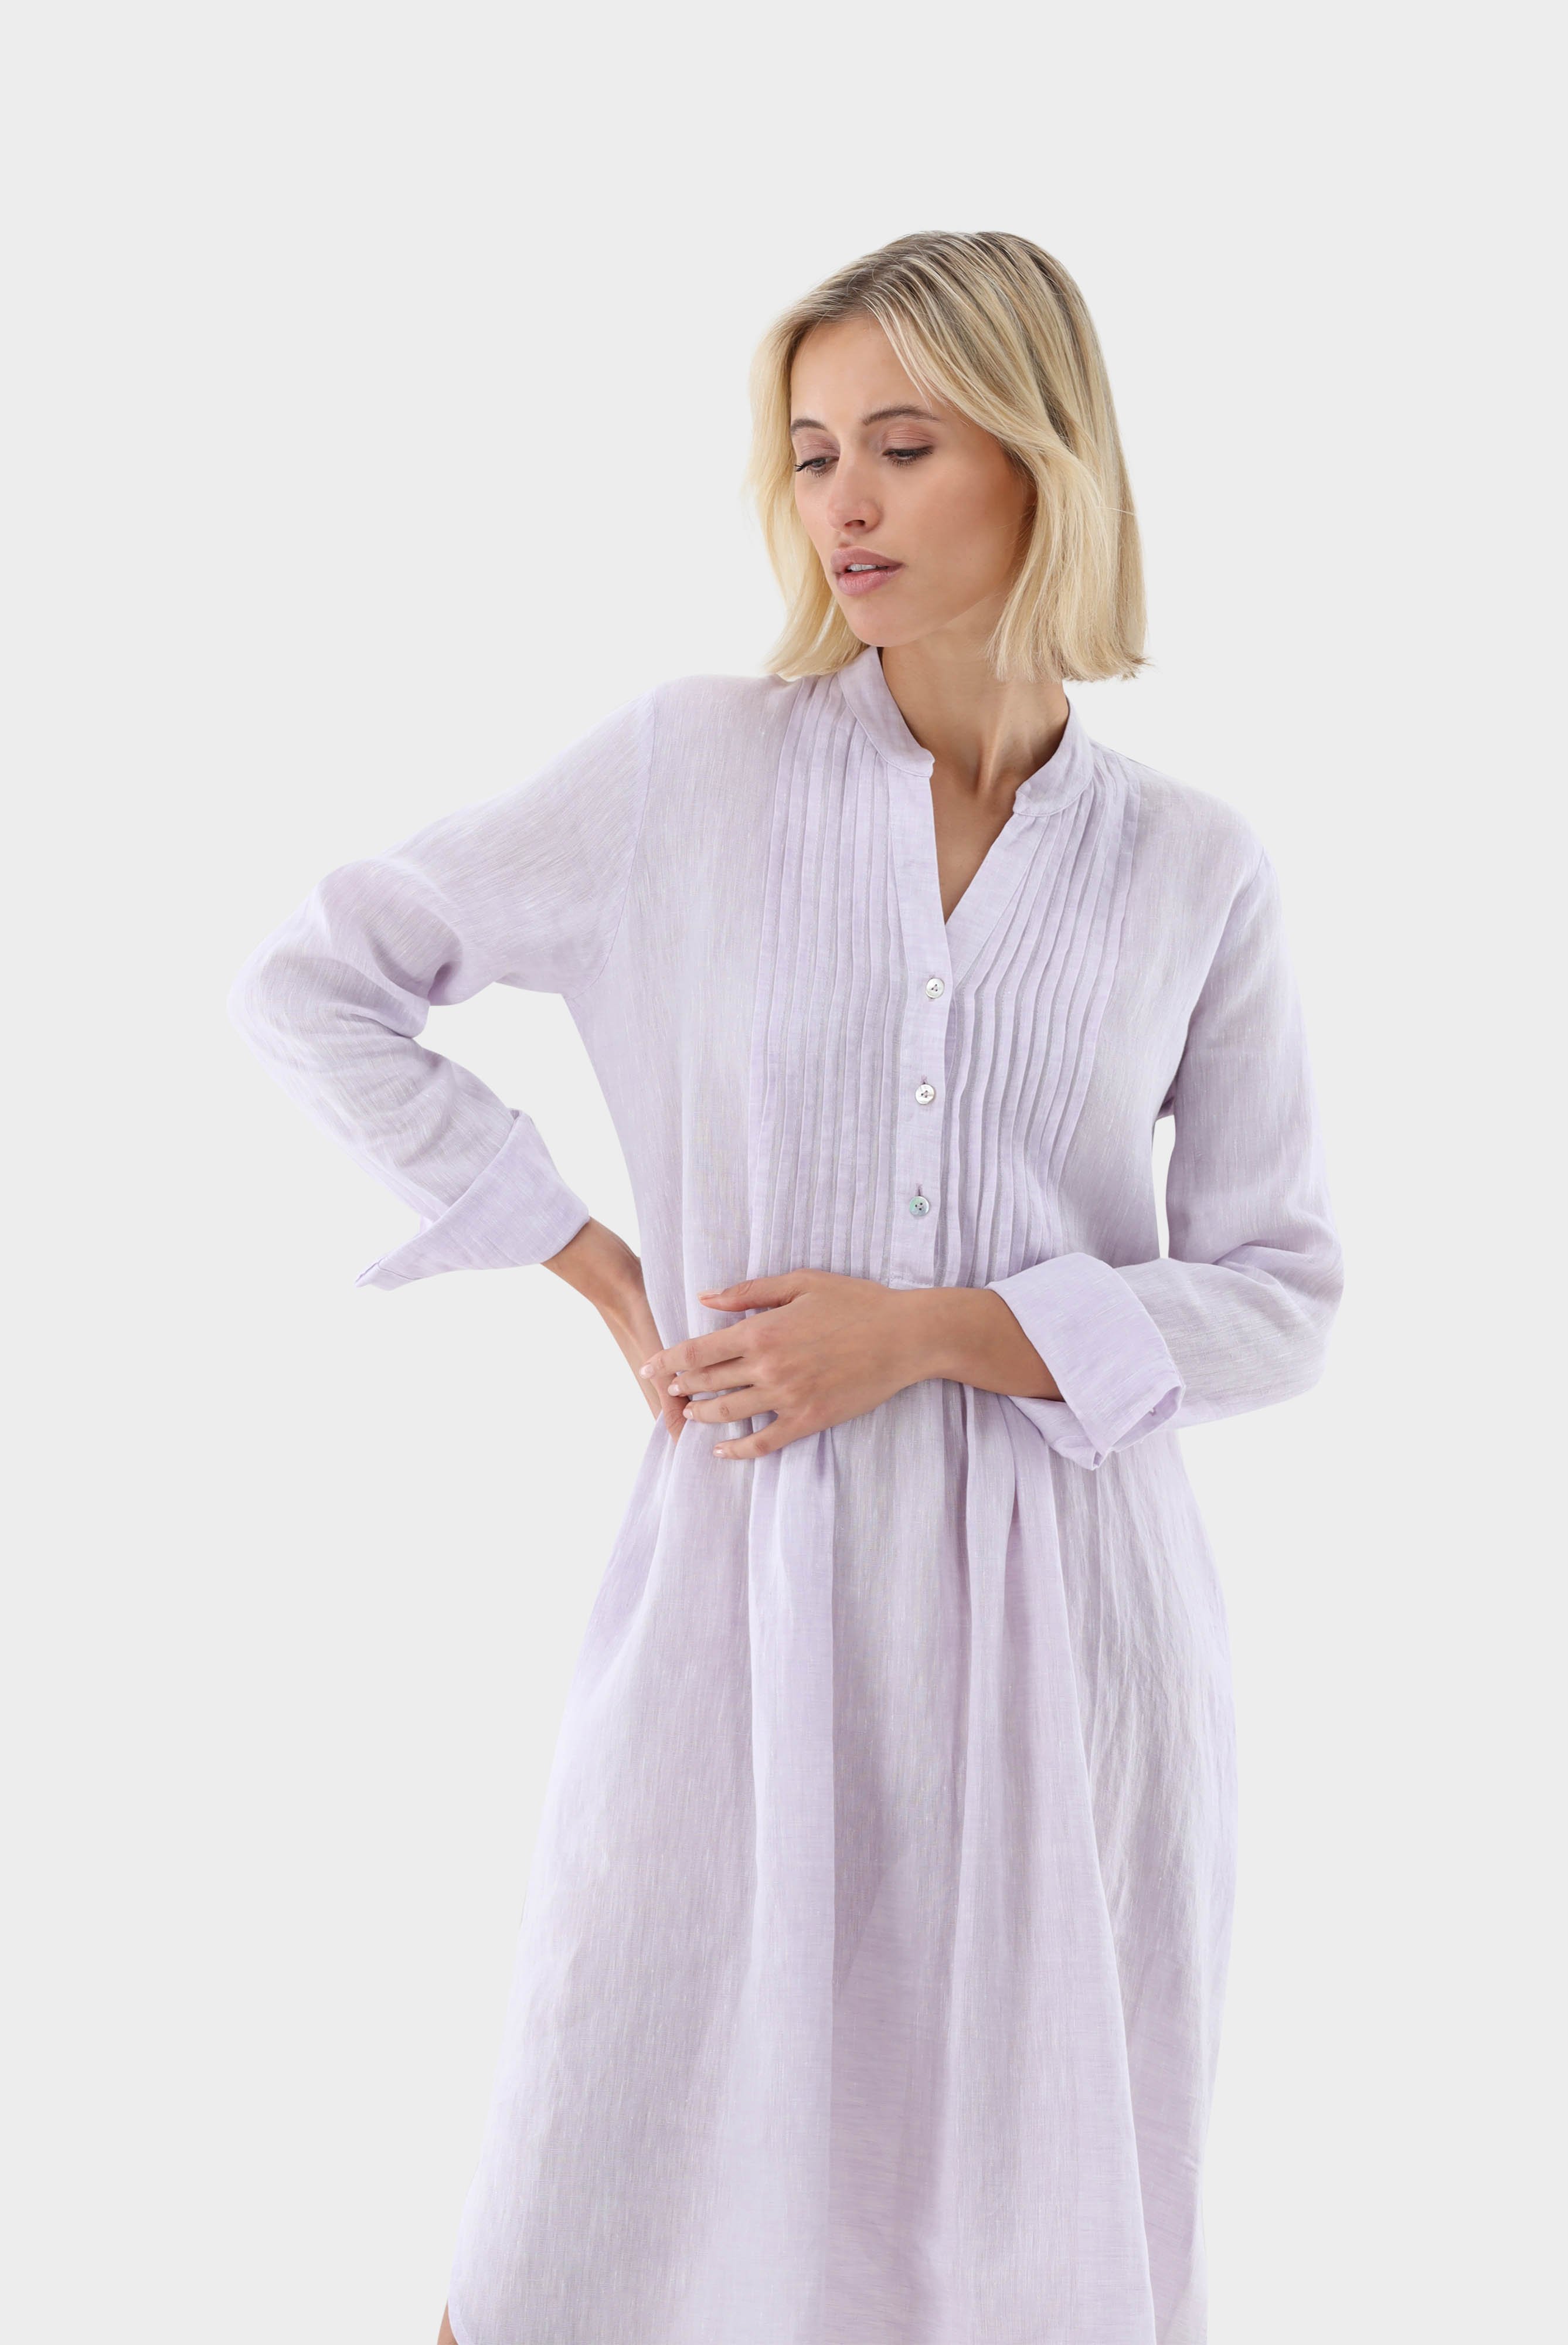 Knee-length dress with stand-up collar and ruffles made of linen